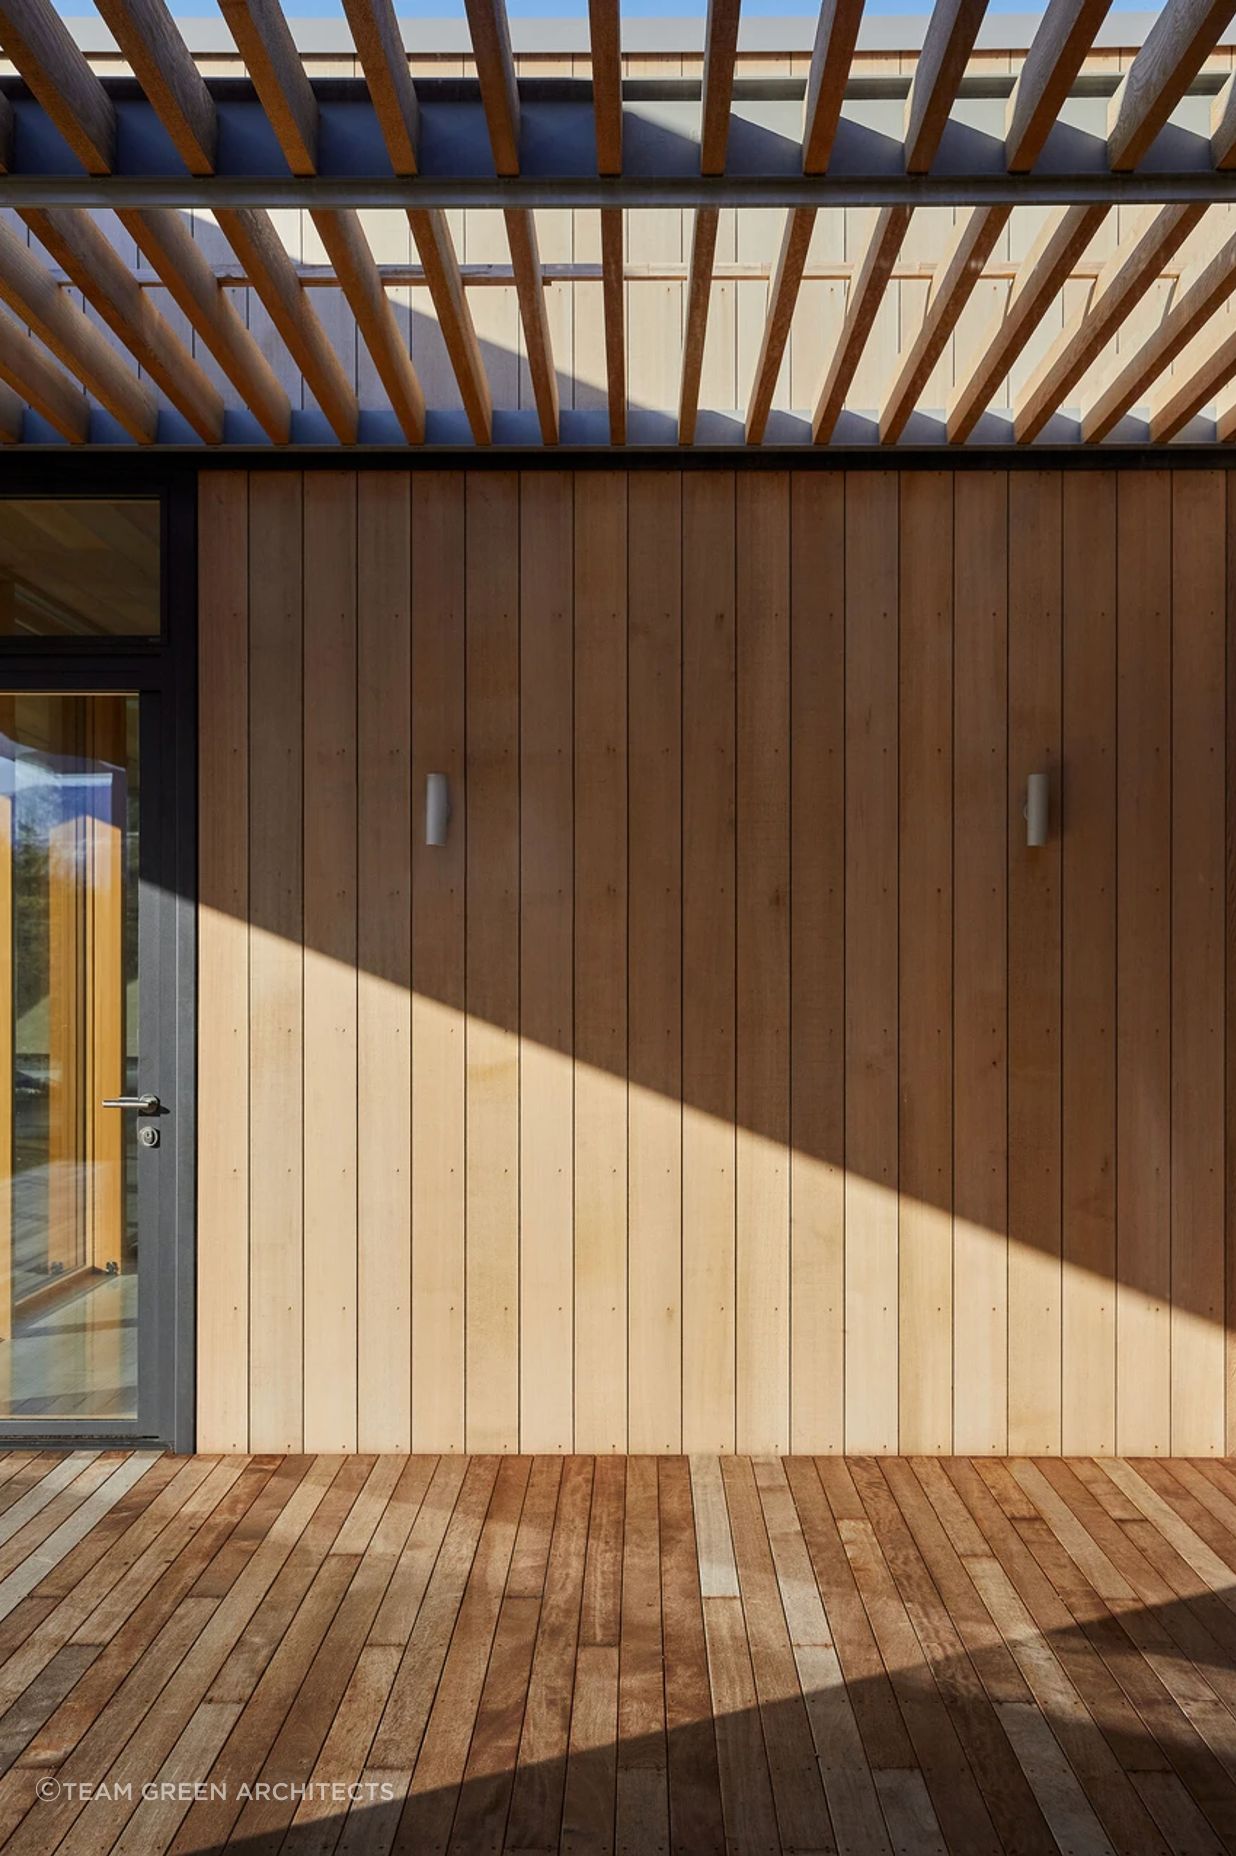 The corrugated iron cladding contrasts with the softness of timber.